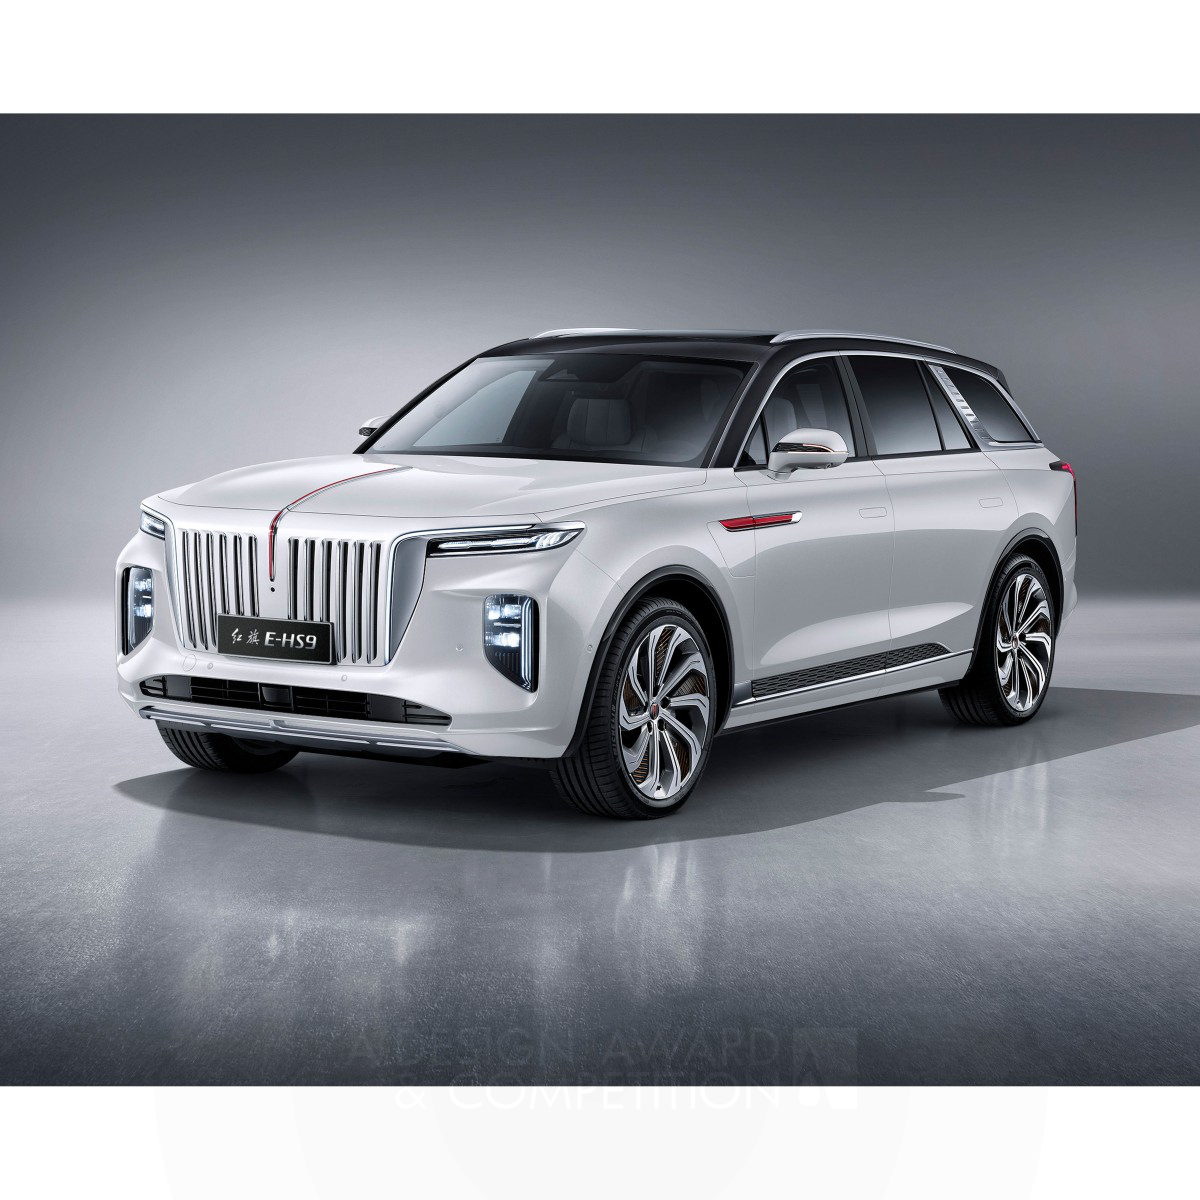 CHINA FAW GROUP CO., LTD. wins Platinum at the prestigious A' Car and Land Based Motor Vehicles Design Award with Hongqi E-HS9 Full Electric Car.